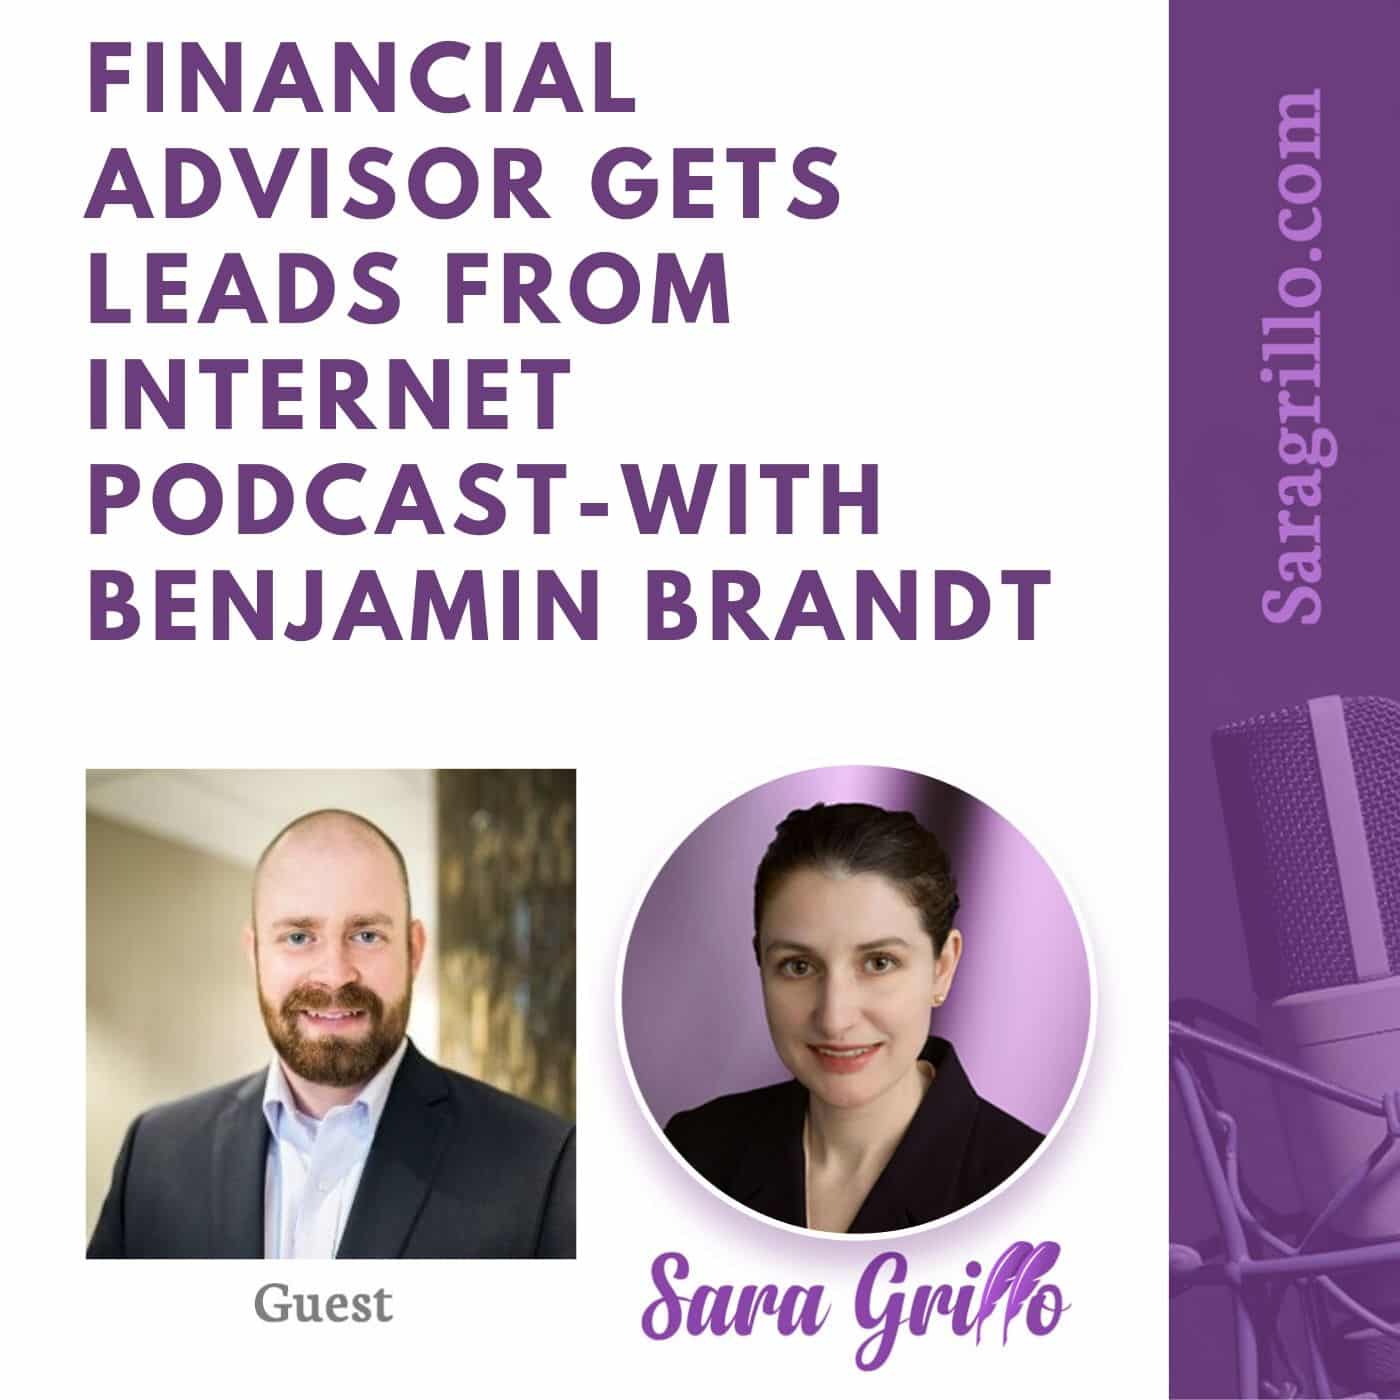 In this podcast we speak with Benjamin Brandt, a financial advisor who successfully gets leads from the internet podcast he runs.